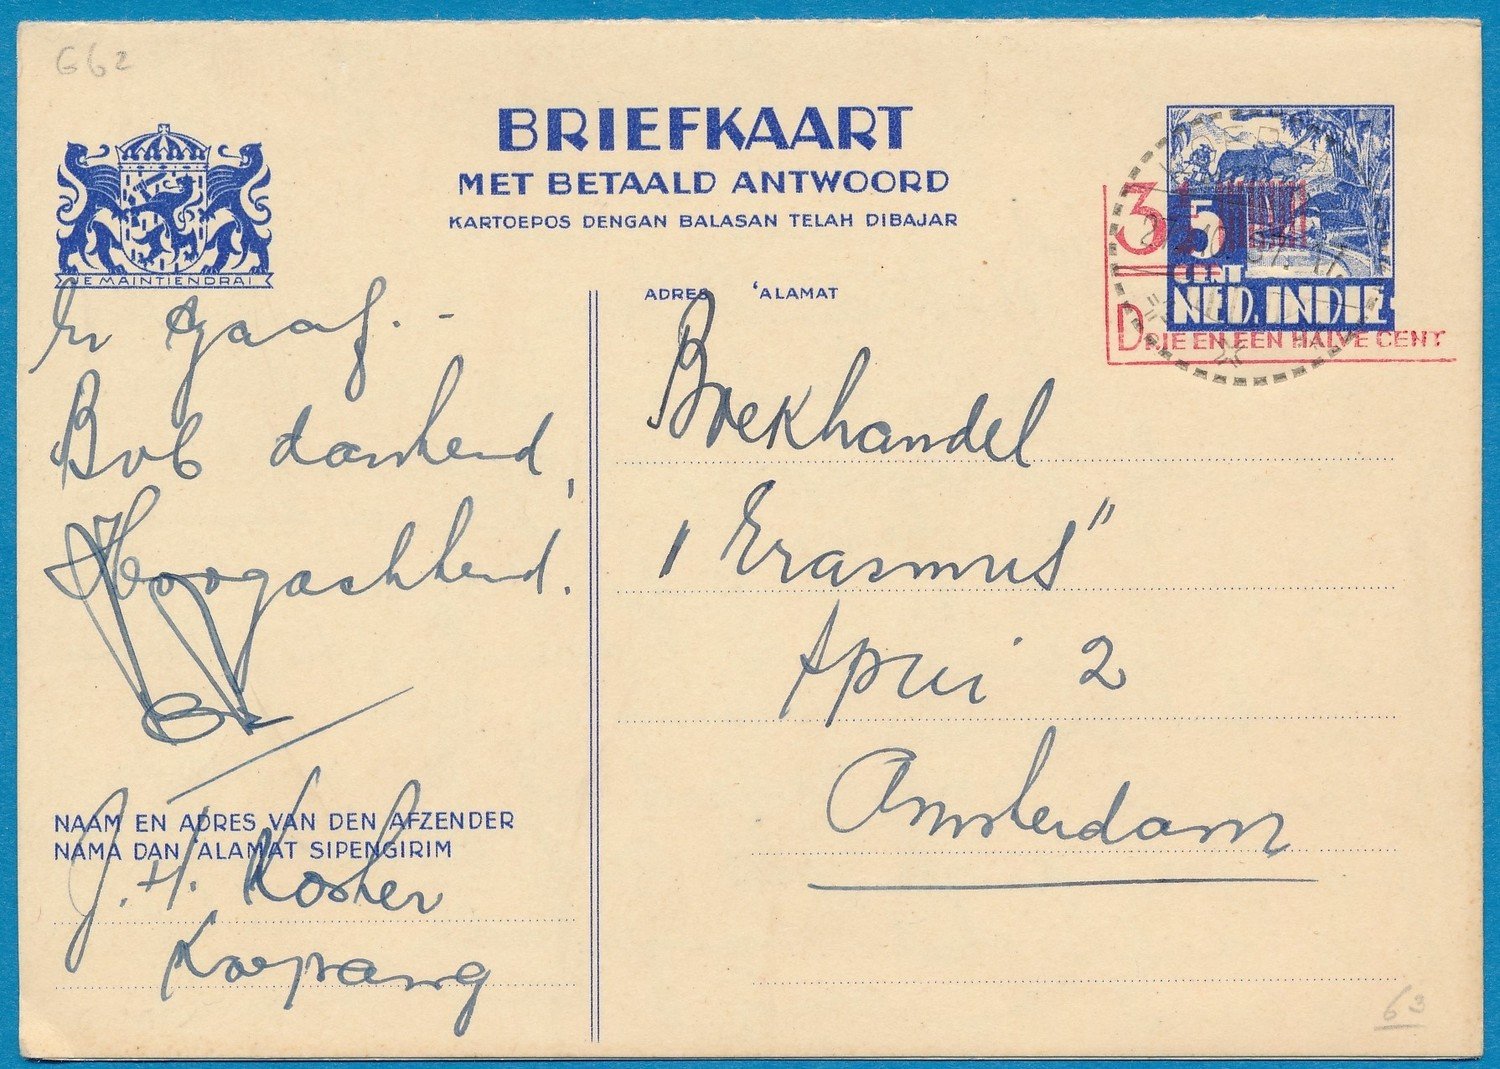 NETHERLANDS EAST INDIES card with reply 1937 Koepang